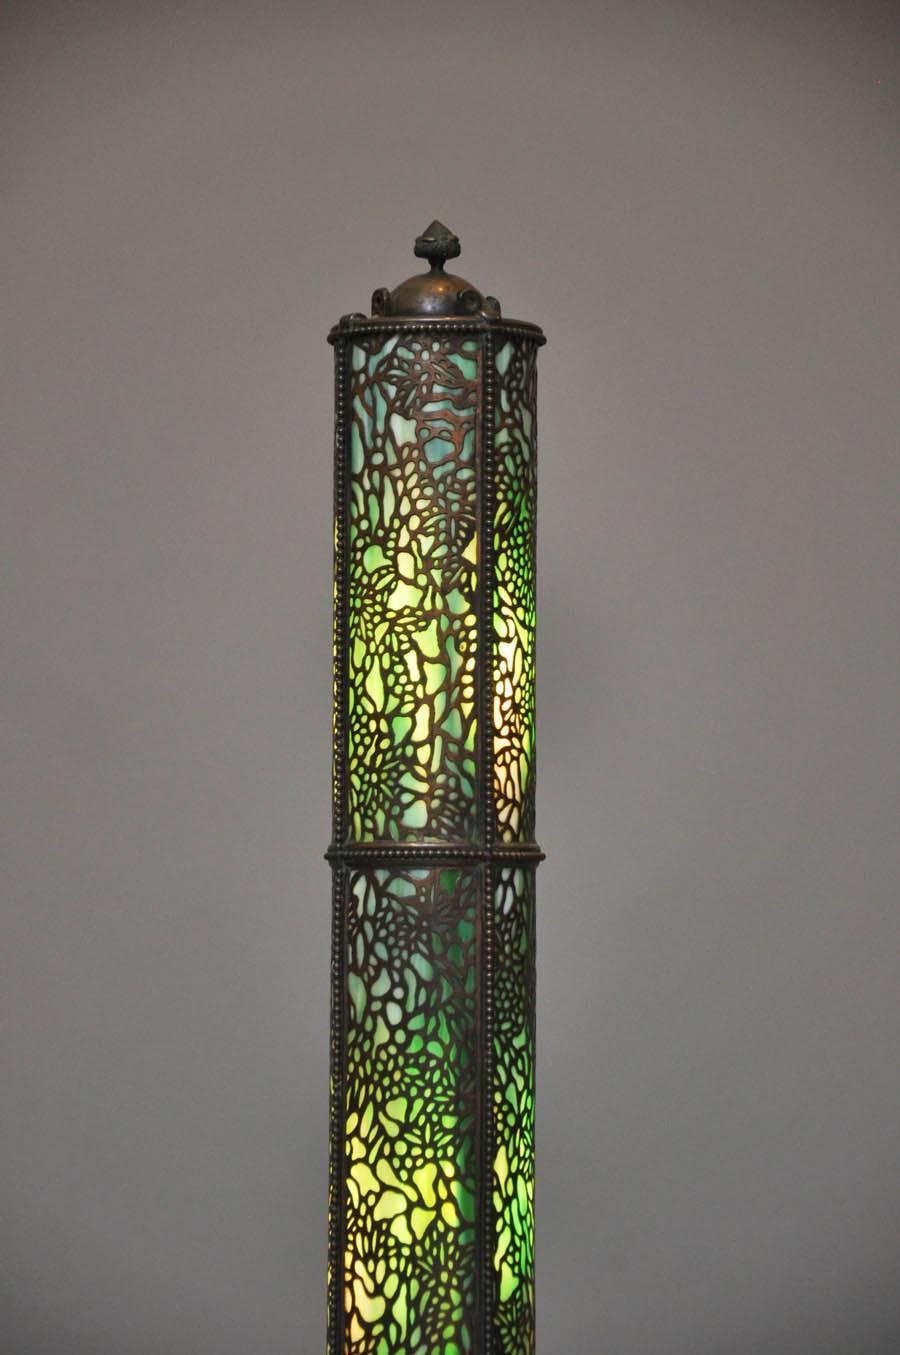 This rare and large Art Nouveau Tiffany inspired mosaic design with green glass, copper and bronze floor lamp with tubular shaped stained glass body overlaid with copper filigree and bronze beading border, a copper crown with acorn finial, lamp